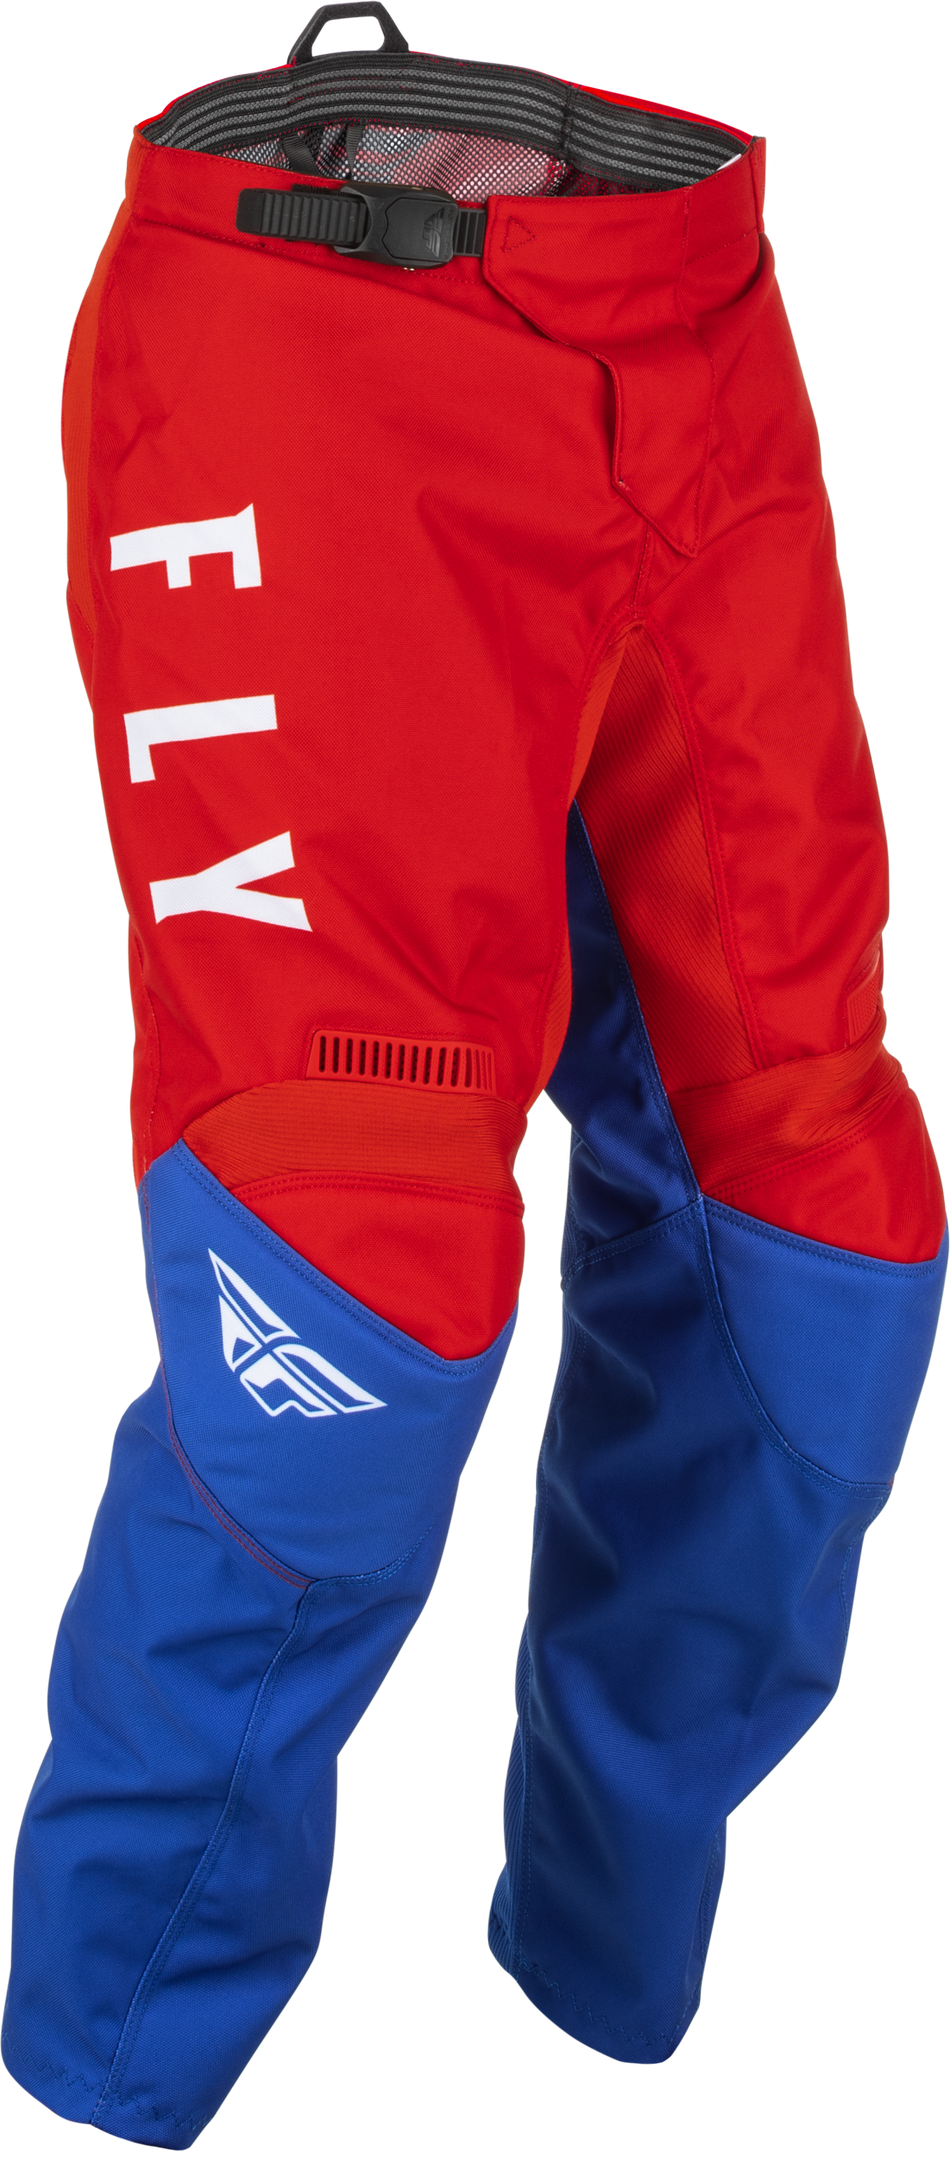 FLY RACING Youth F-16 Pants Red/White/Blue Sz 22 375-93422